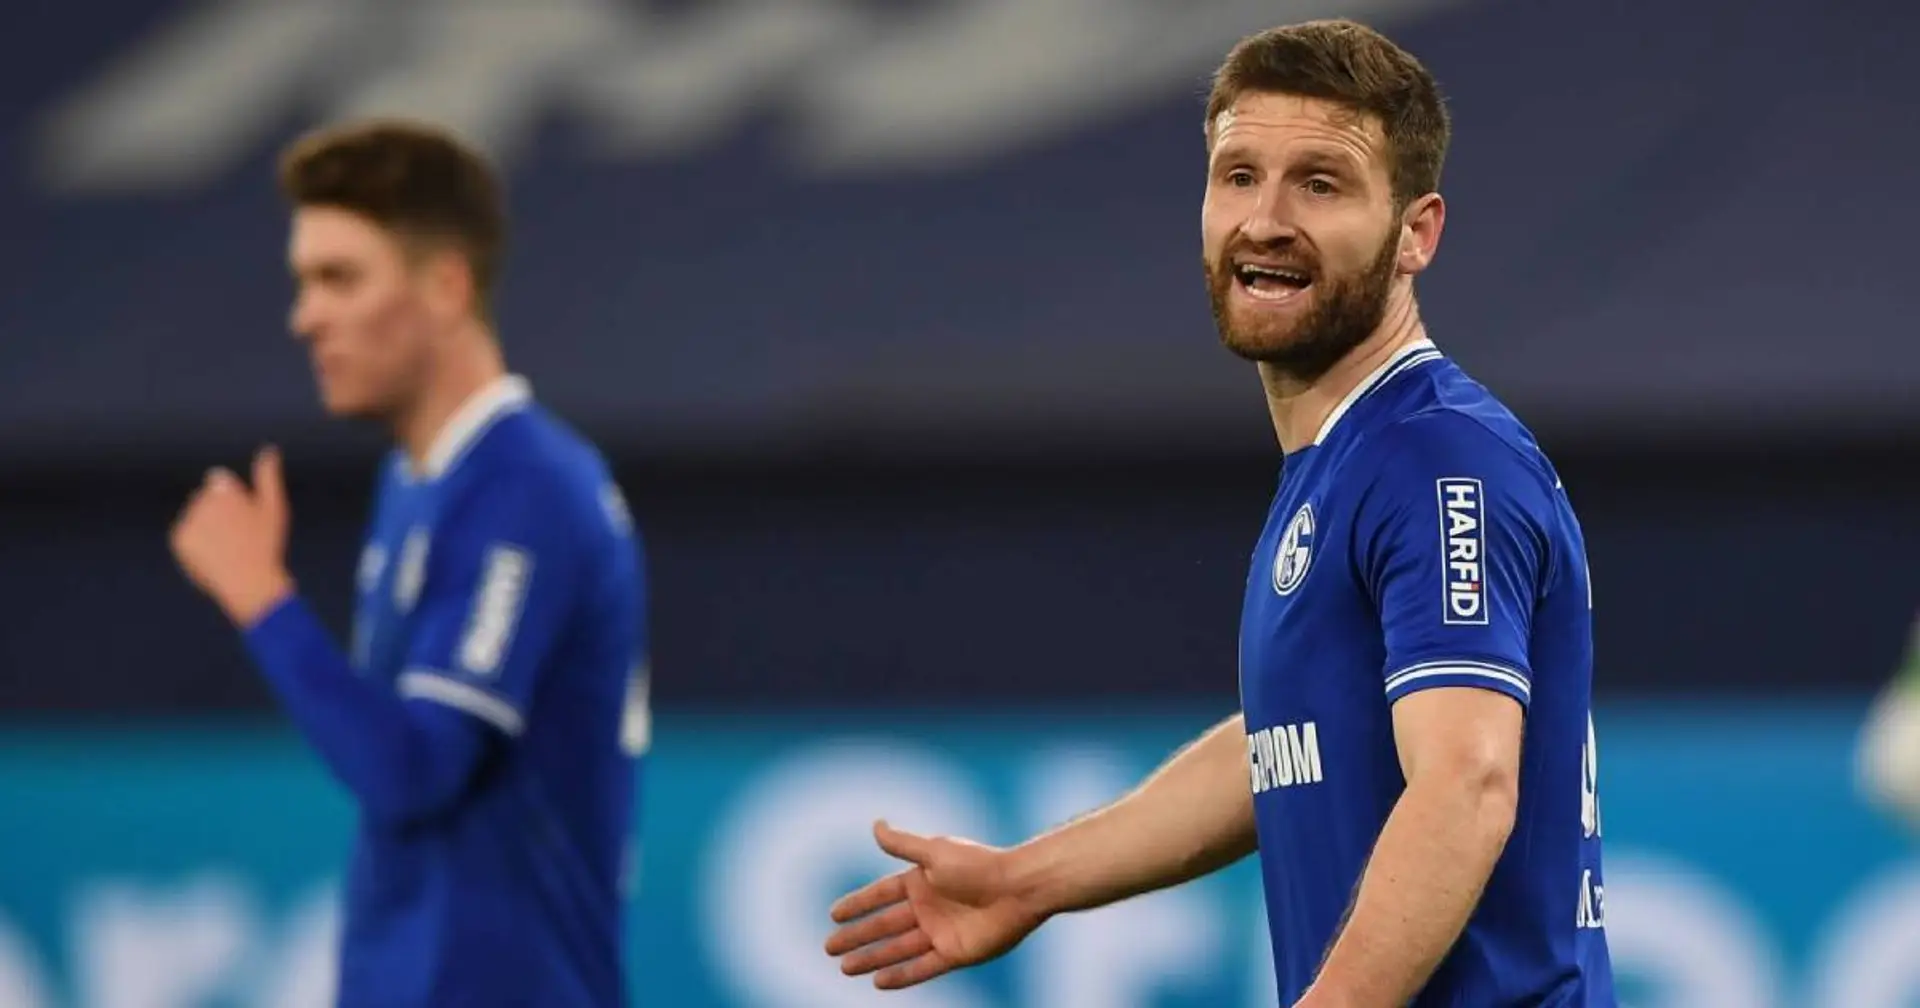 Mustafi set to leave Schalke after just 4 months at club